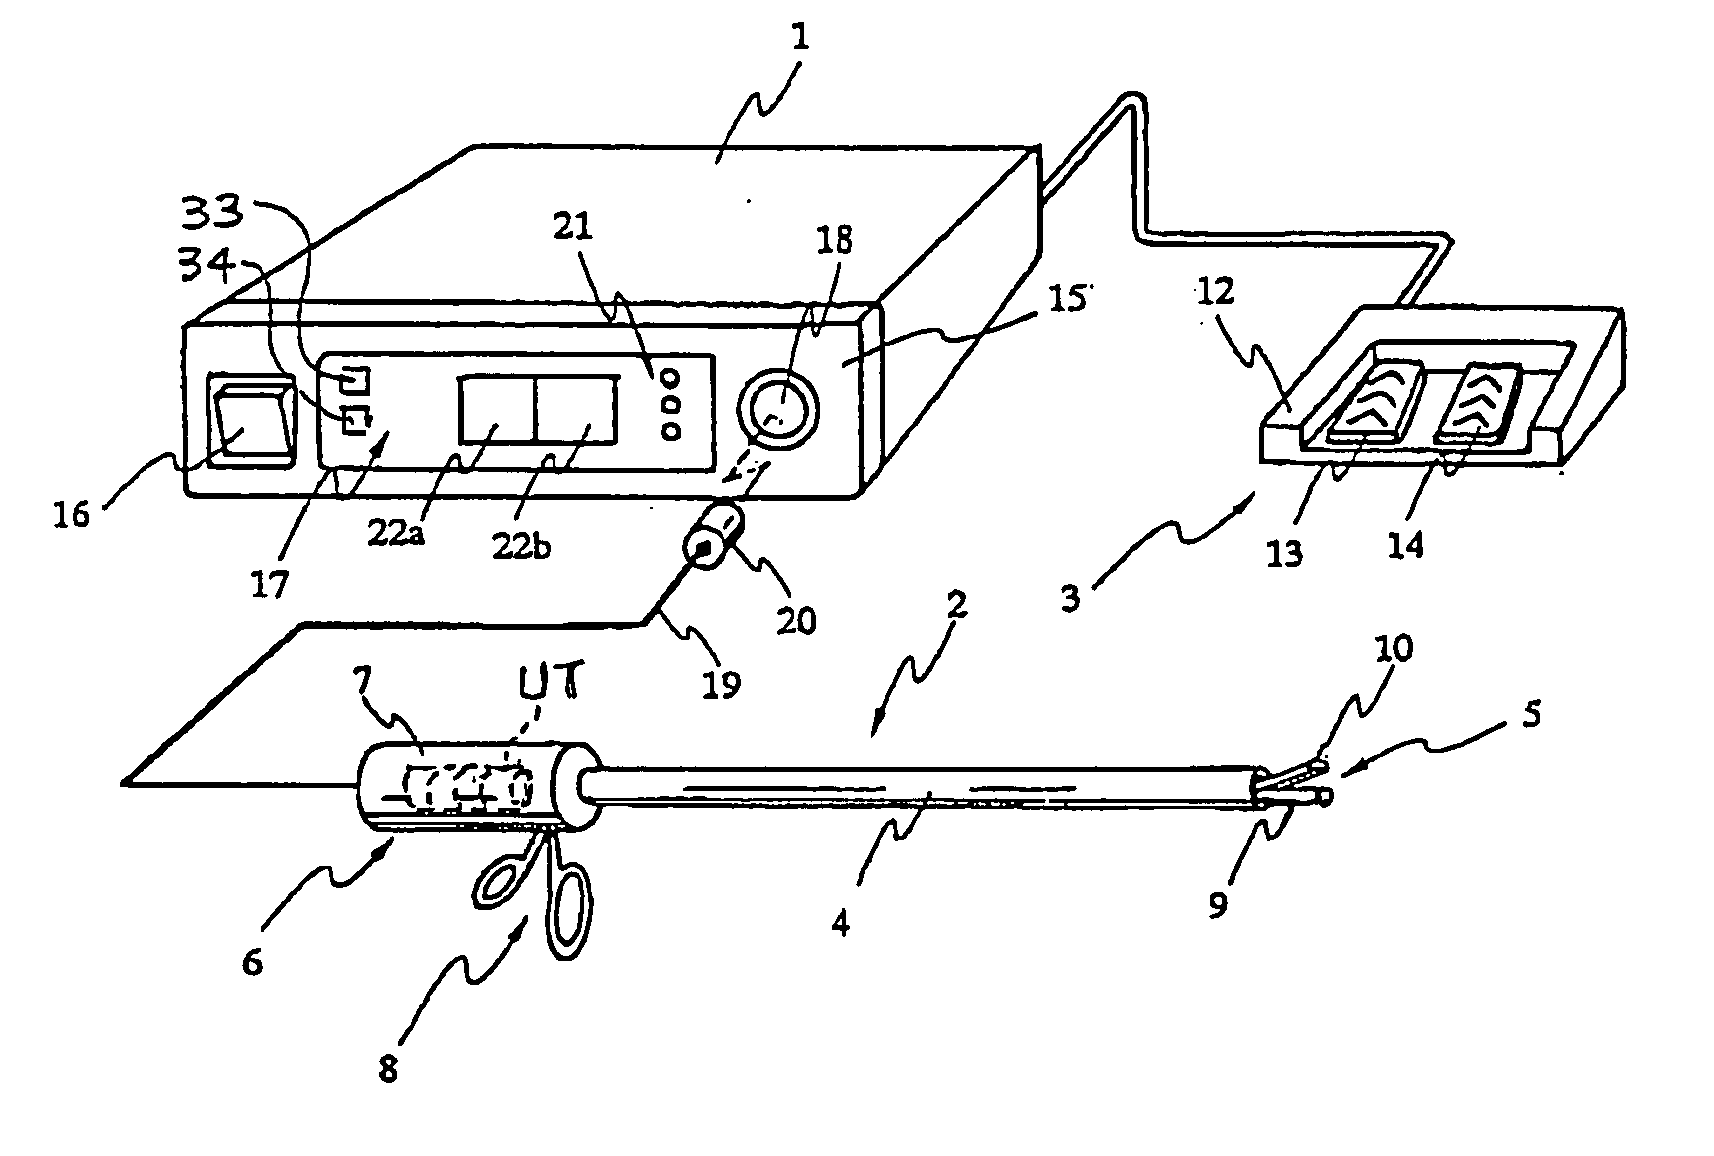 Ultrasonic surgical apparatus with treatment modes selectable